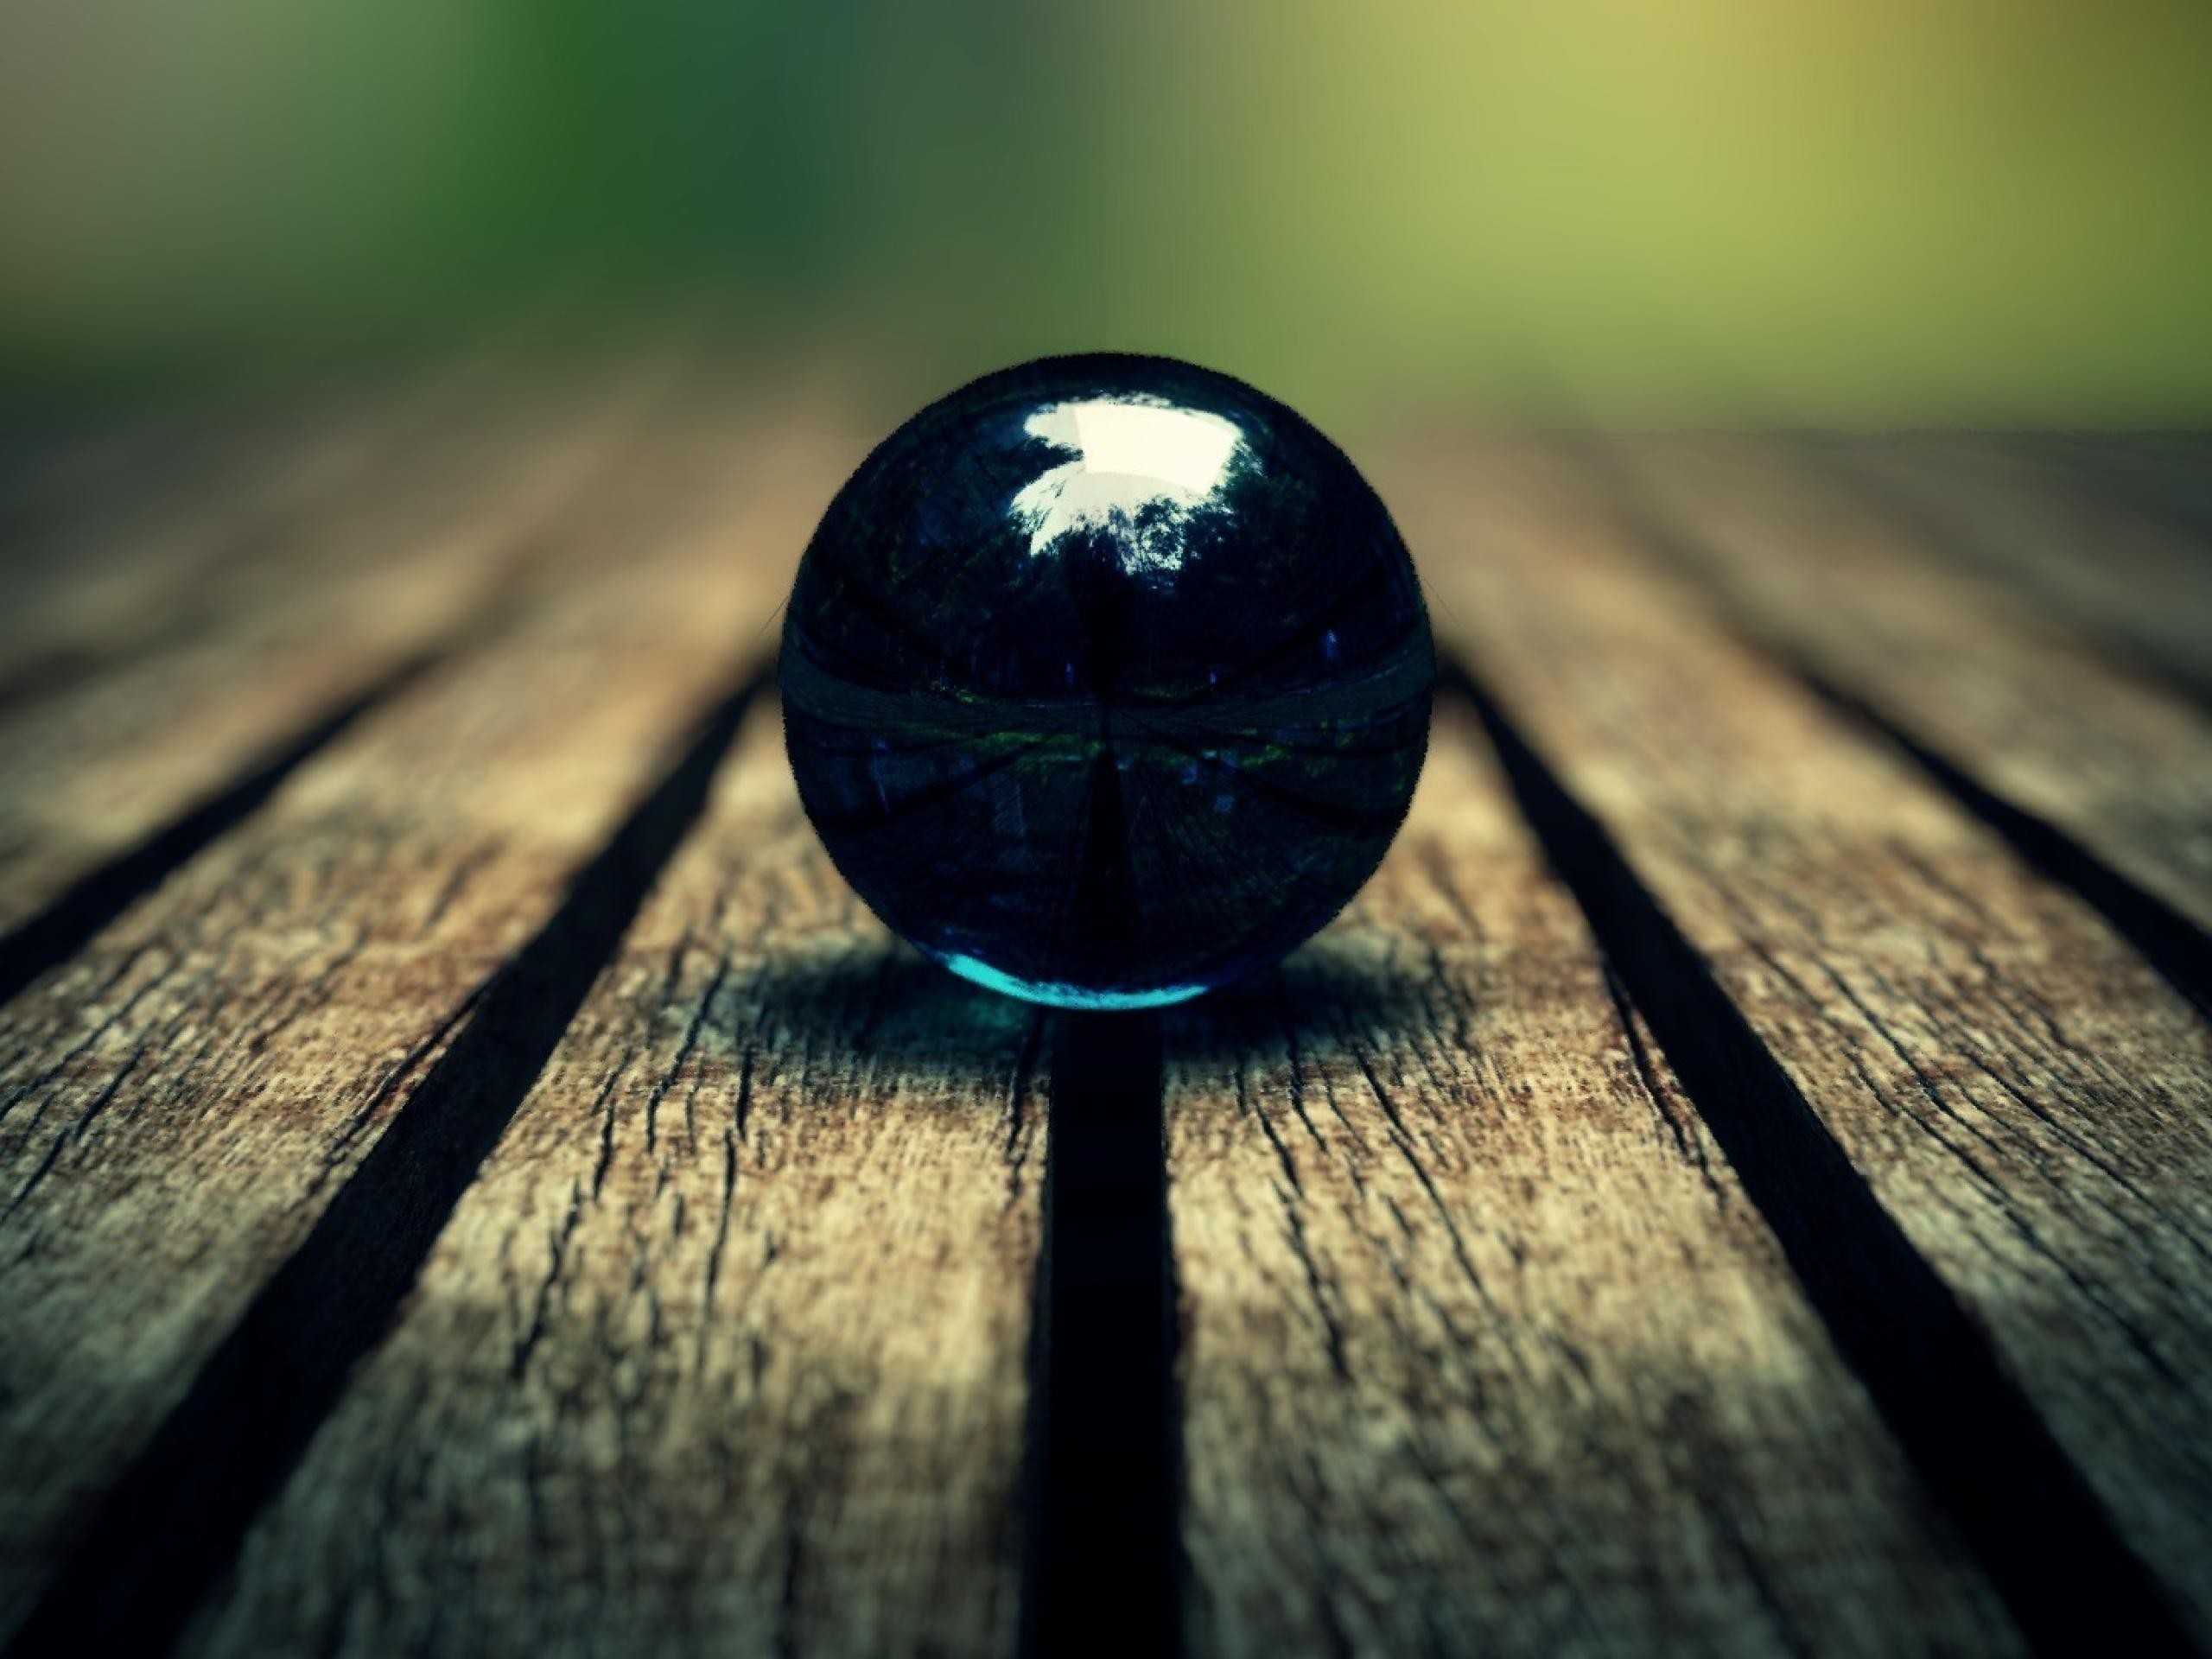 blue, photography, close up, ball, globe, marble, nature, wood